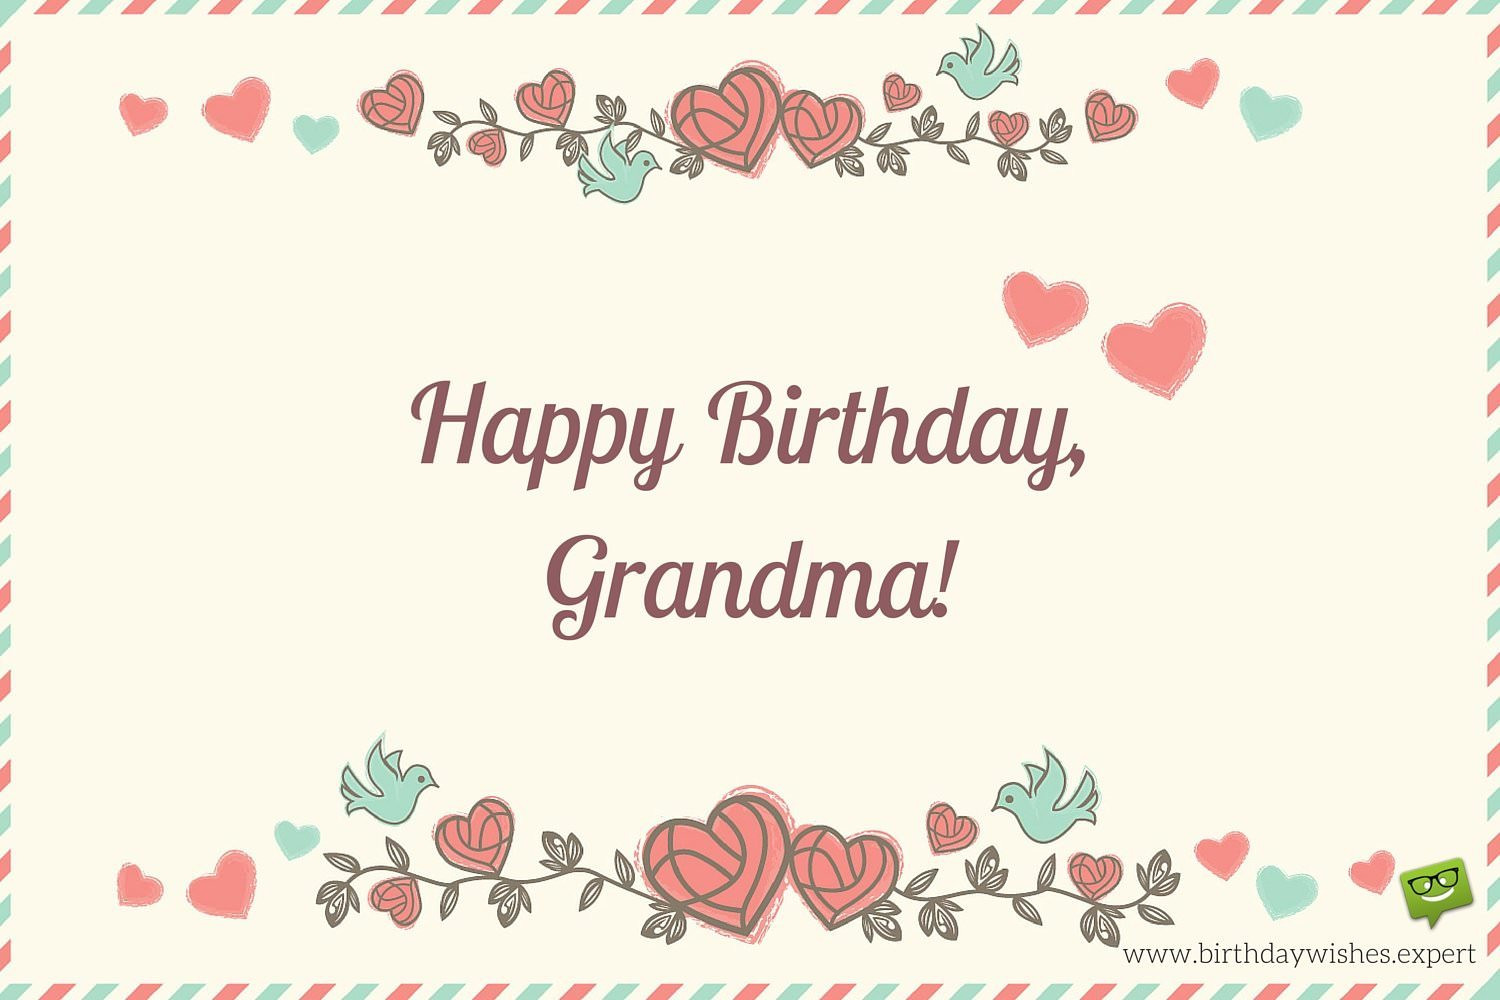 Grandma Birthday Wishes
 Happy Birthday Grandma on image of an old envelope with